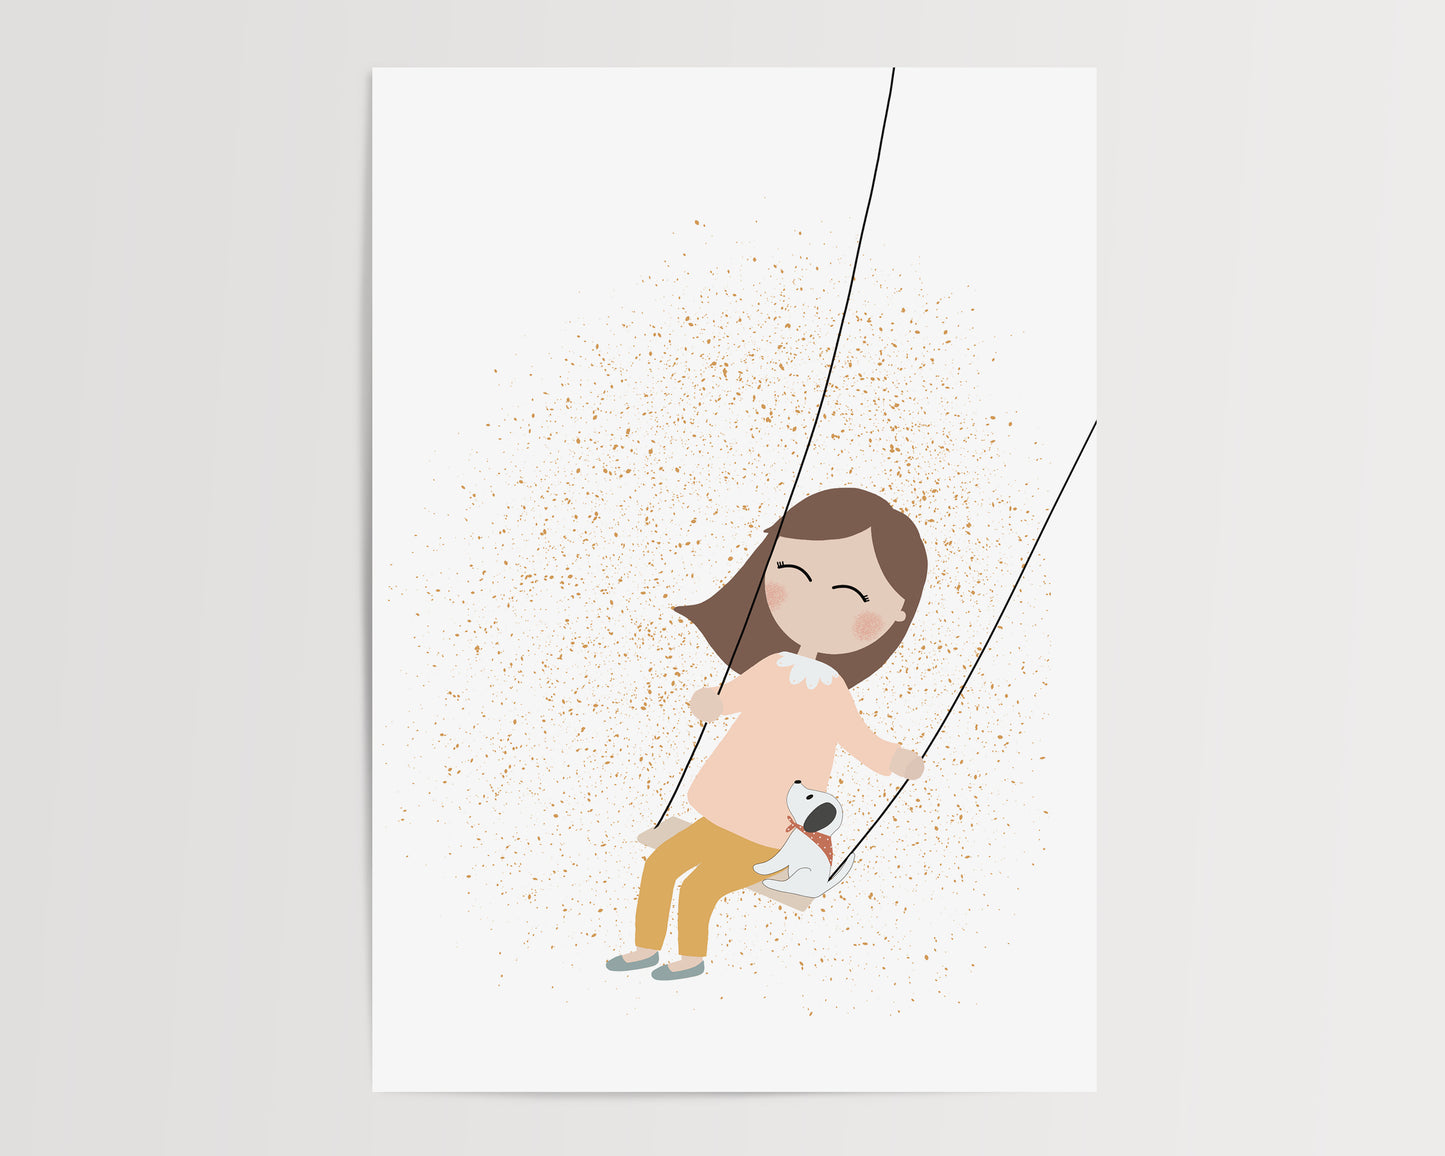 A beautifully illustrated art print featuring a little girl swinging on a swing with her white puppy. This poster certainly brings joy and tenderness to your walls with soft pastel colors.